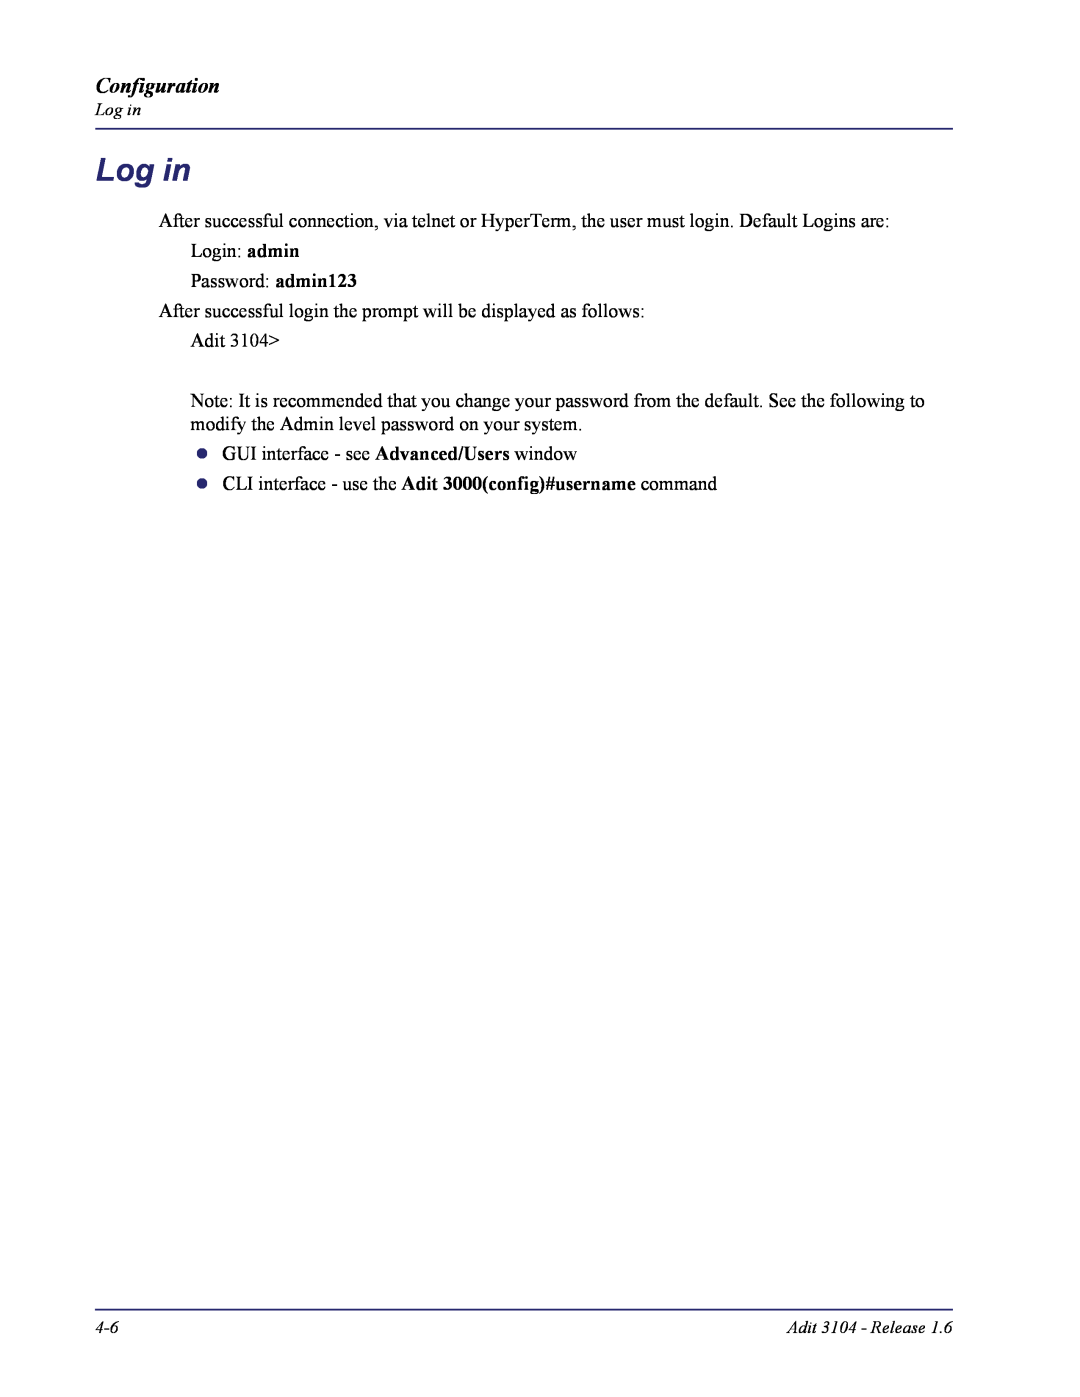 Carrier Access Adit 3104 user manual Log in, Configuration 